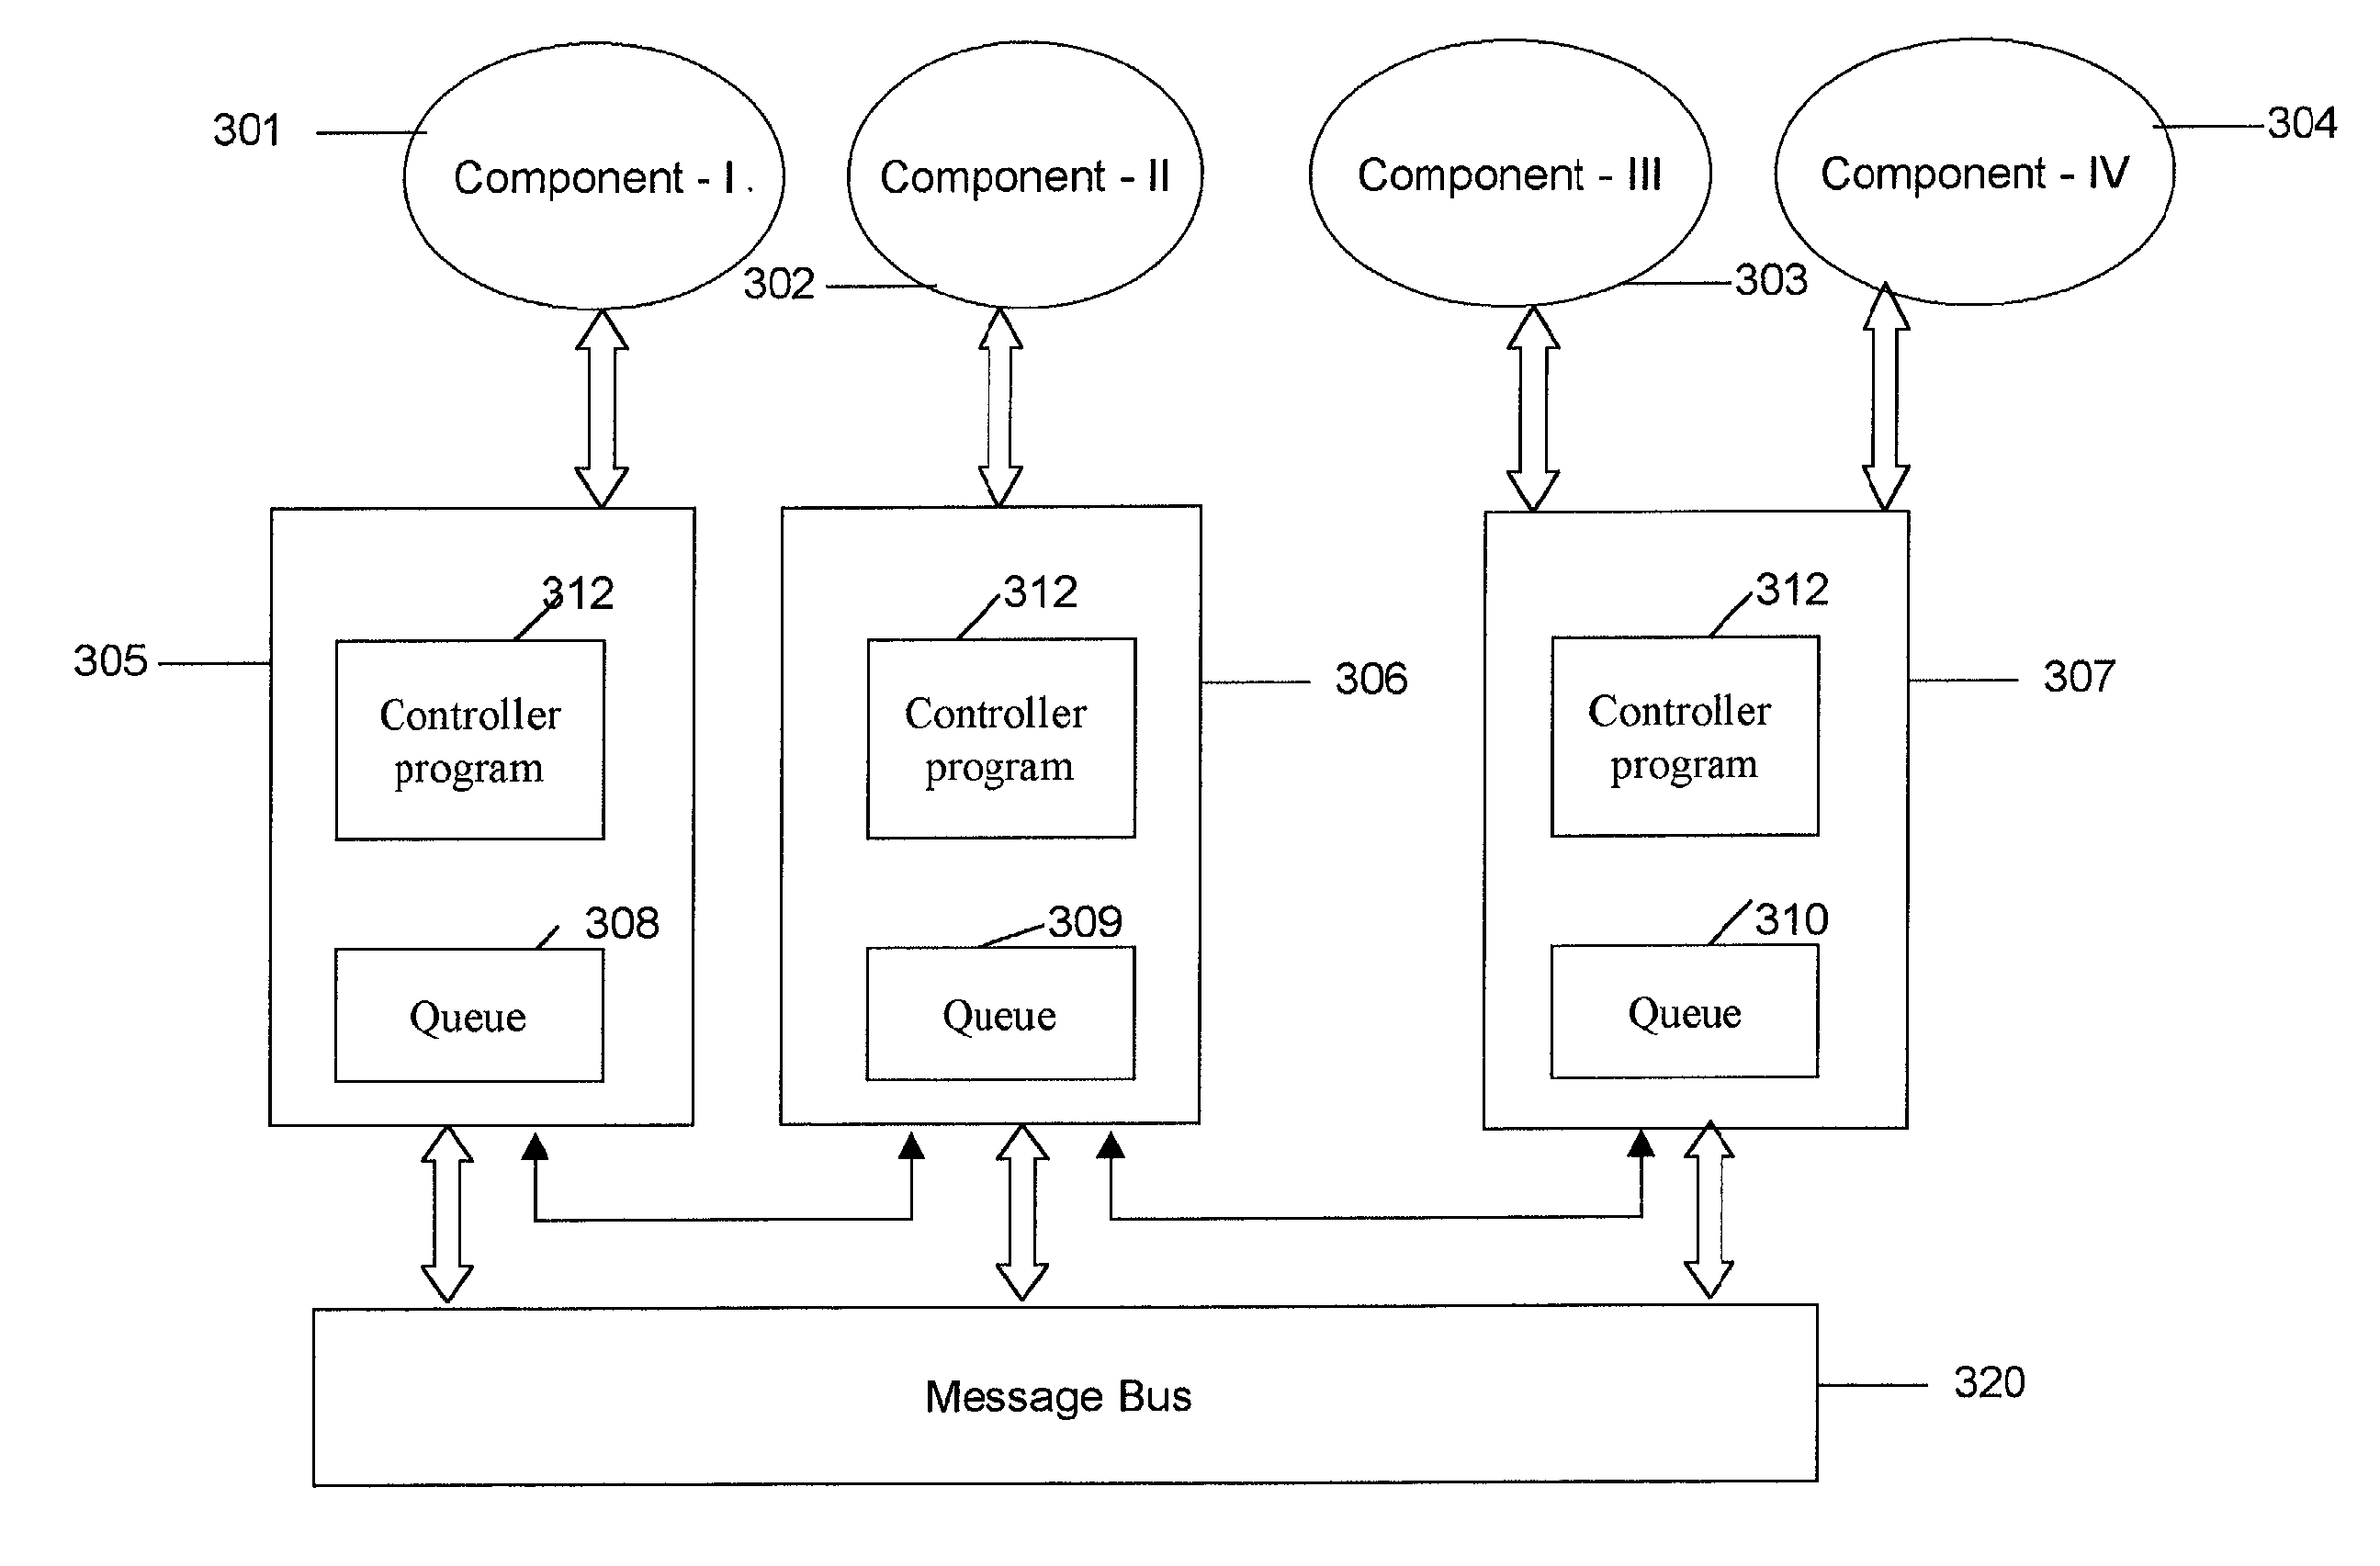 System and methodology for developing, integrating and monitoring computer applications and programs